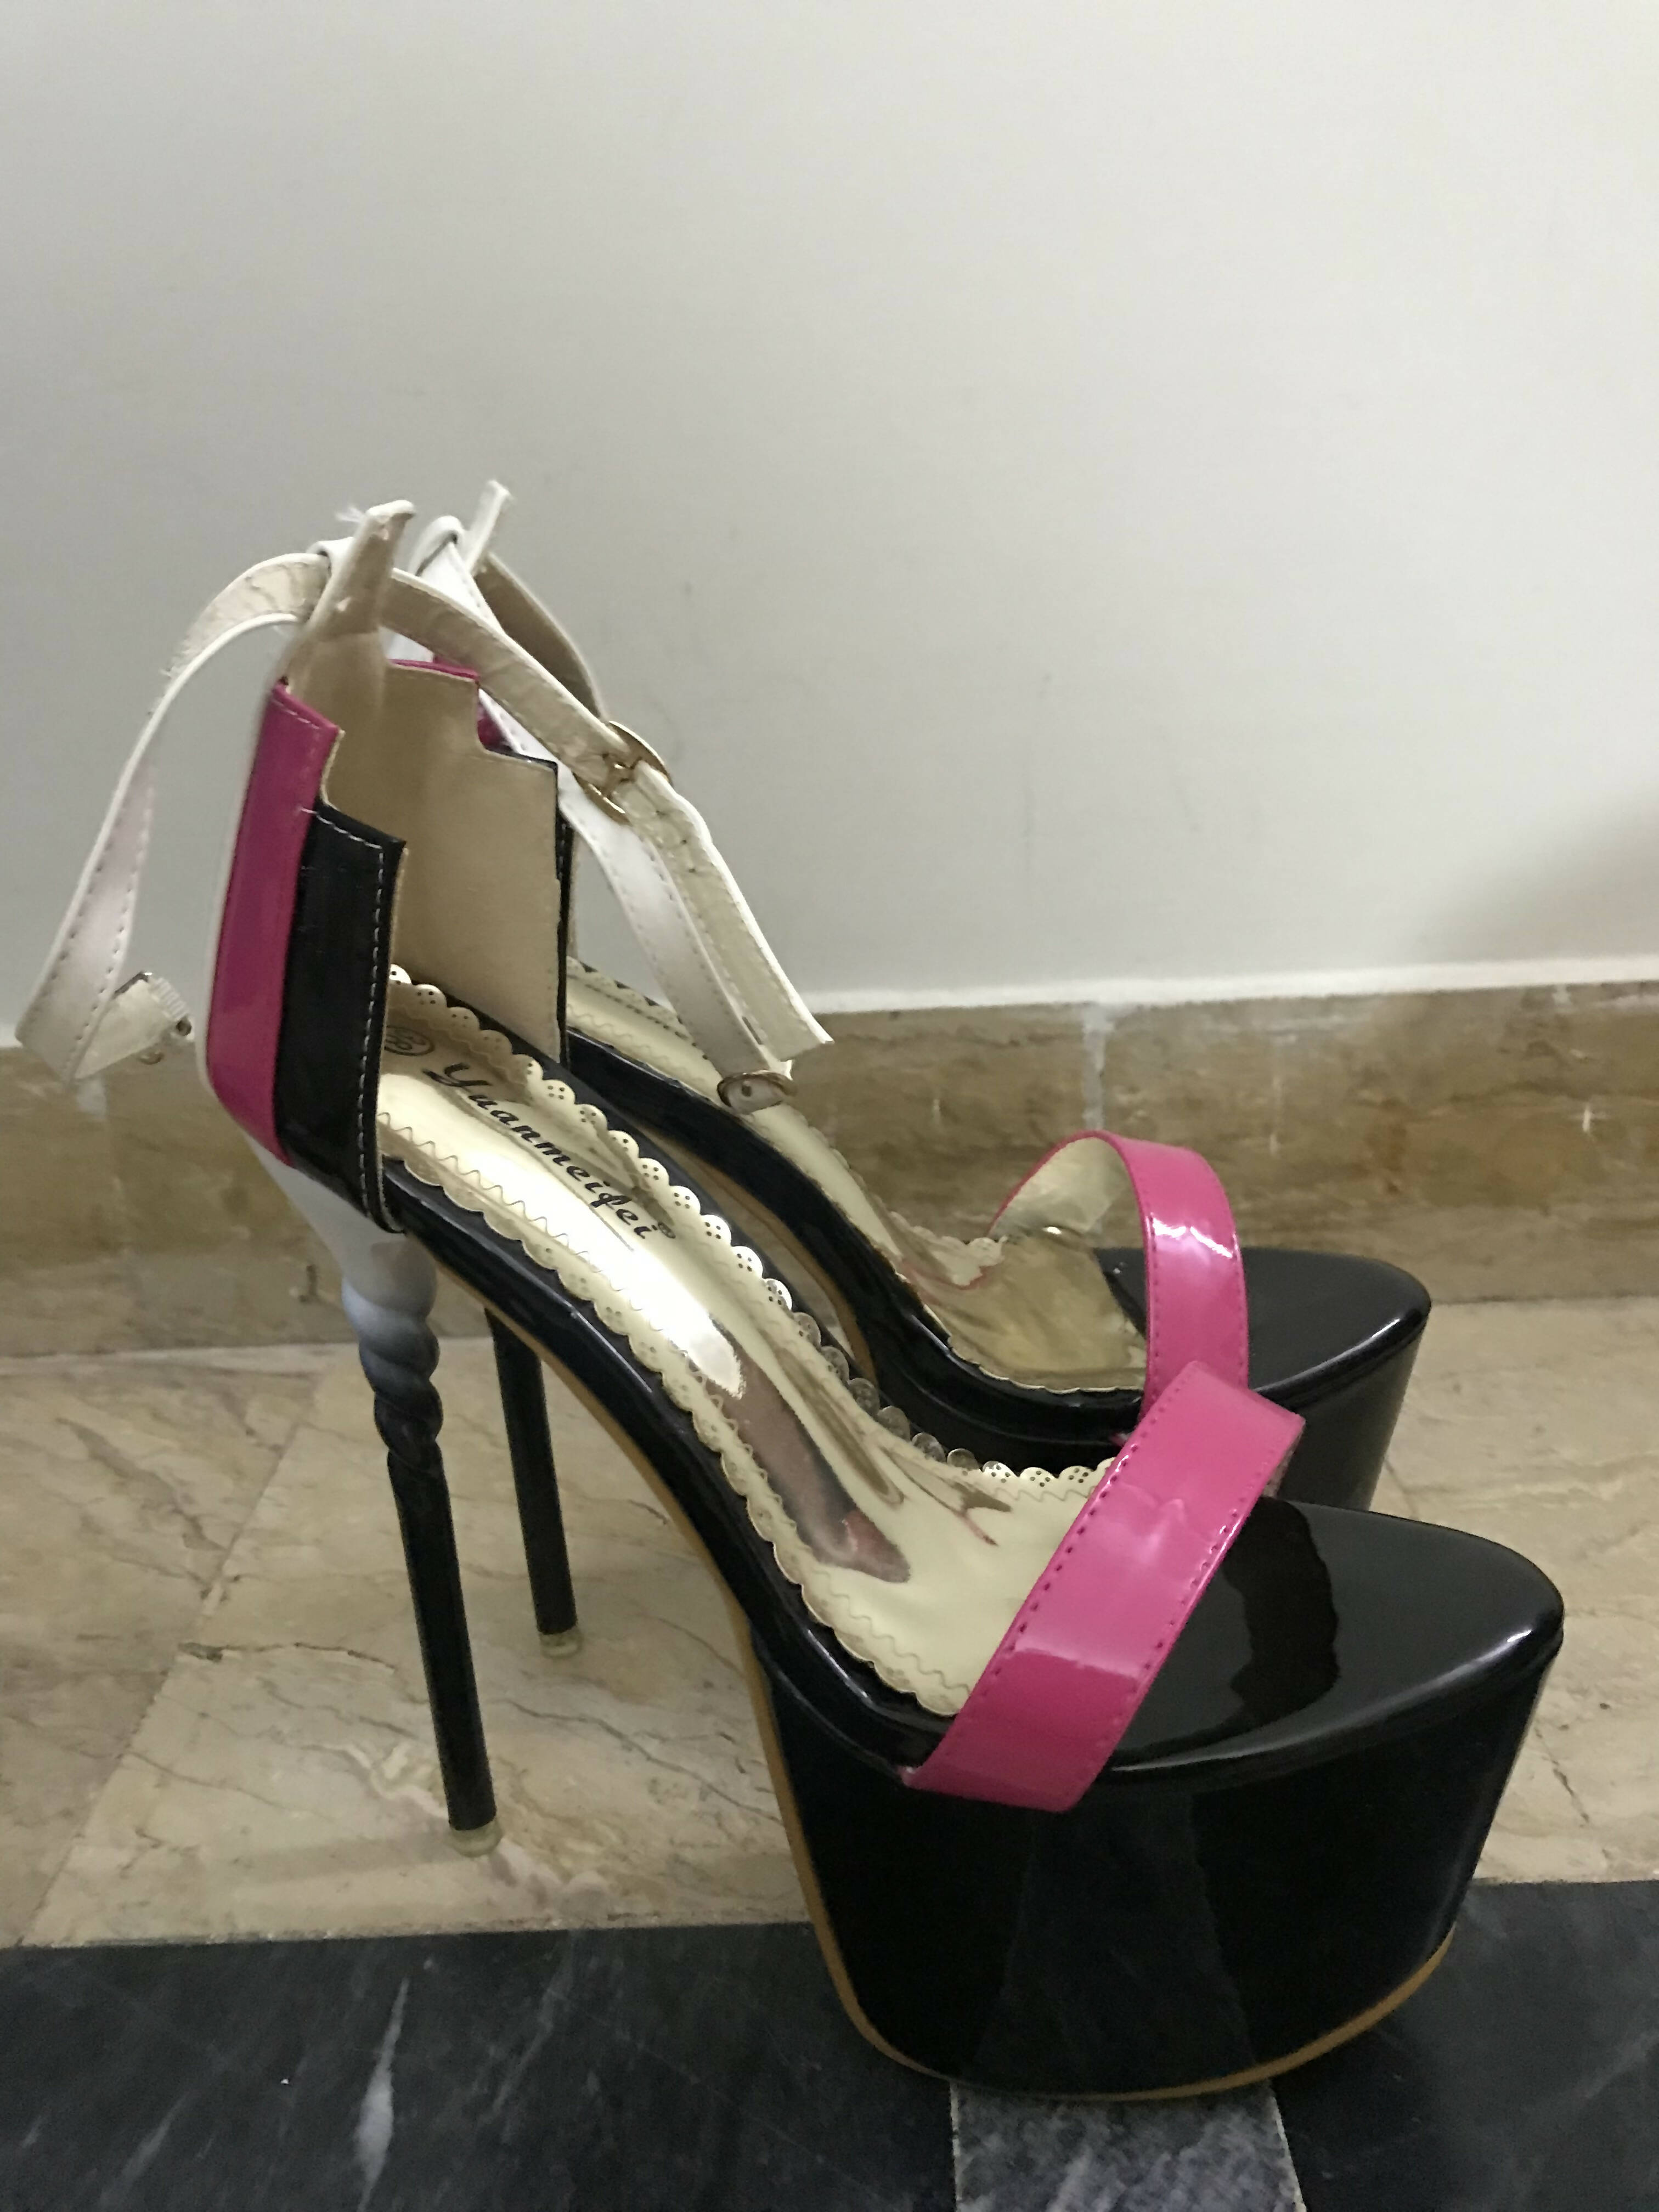 Black & Pink High Heels | Women Shoes | Size: 38 | Worn Once